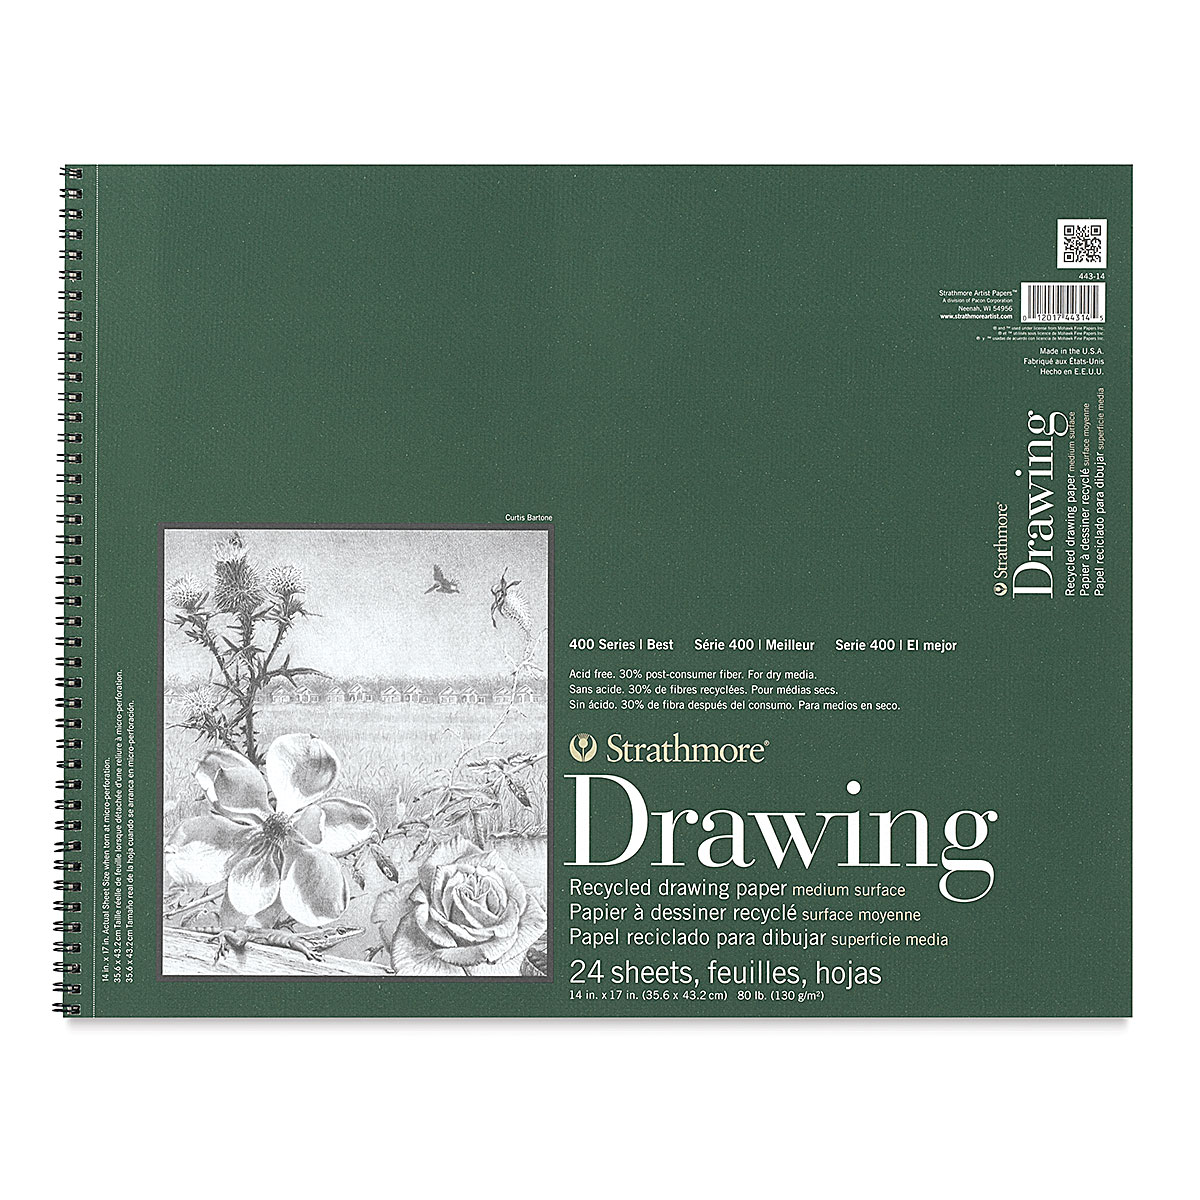 Strathmore 400 Series Recycled Drawing Pads